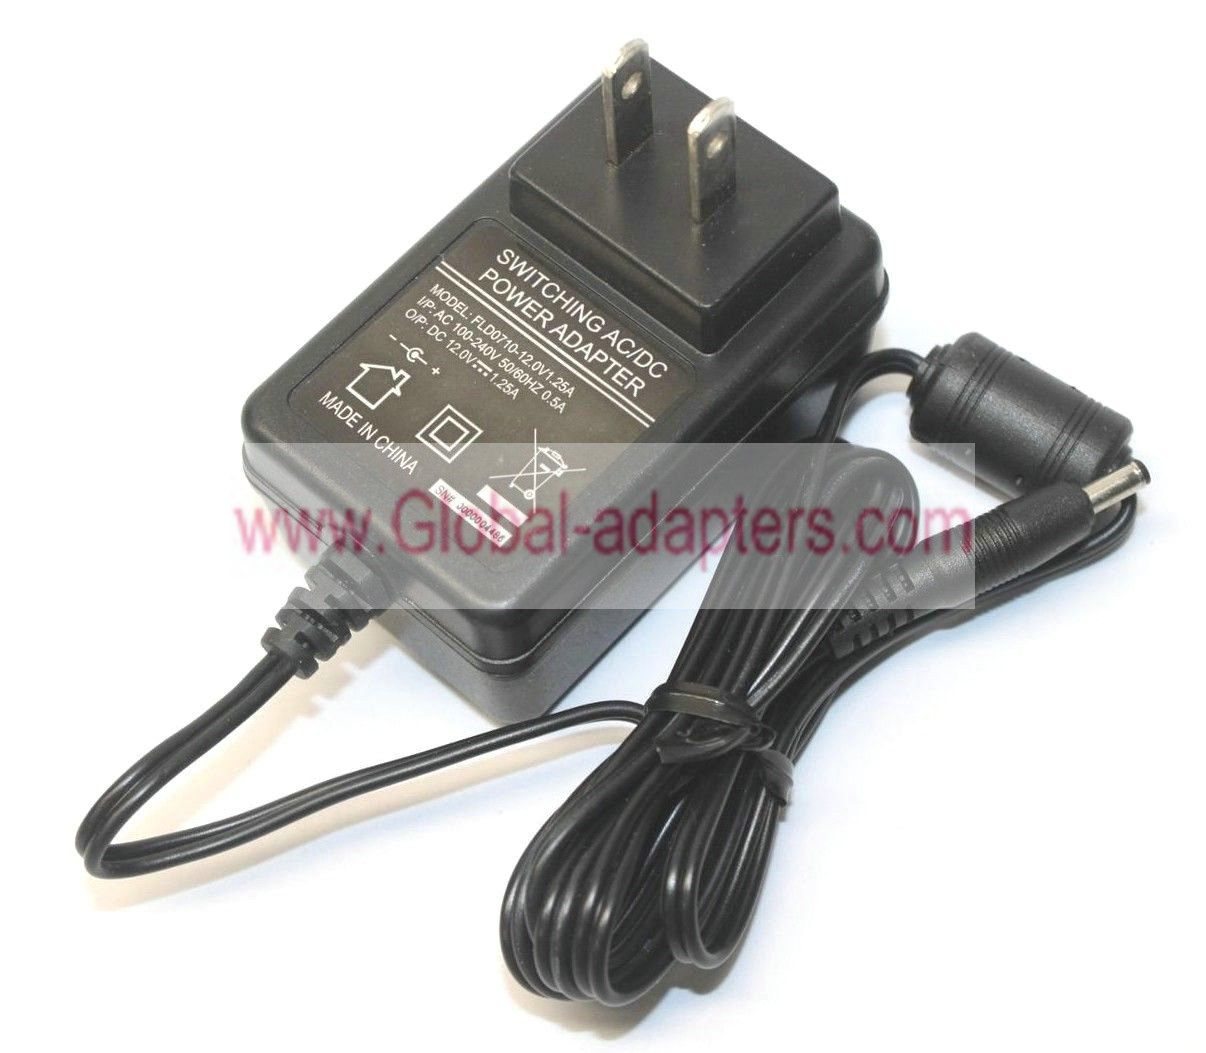 Brand new FLD0710-12.0V1.25A Switching Power Supply DC 12V 1.25A AC Adapter